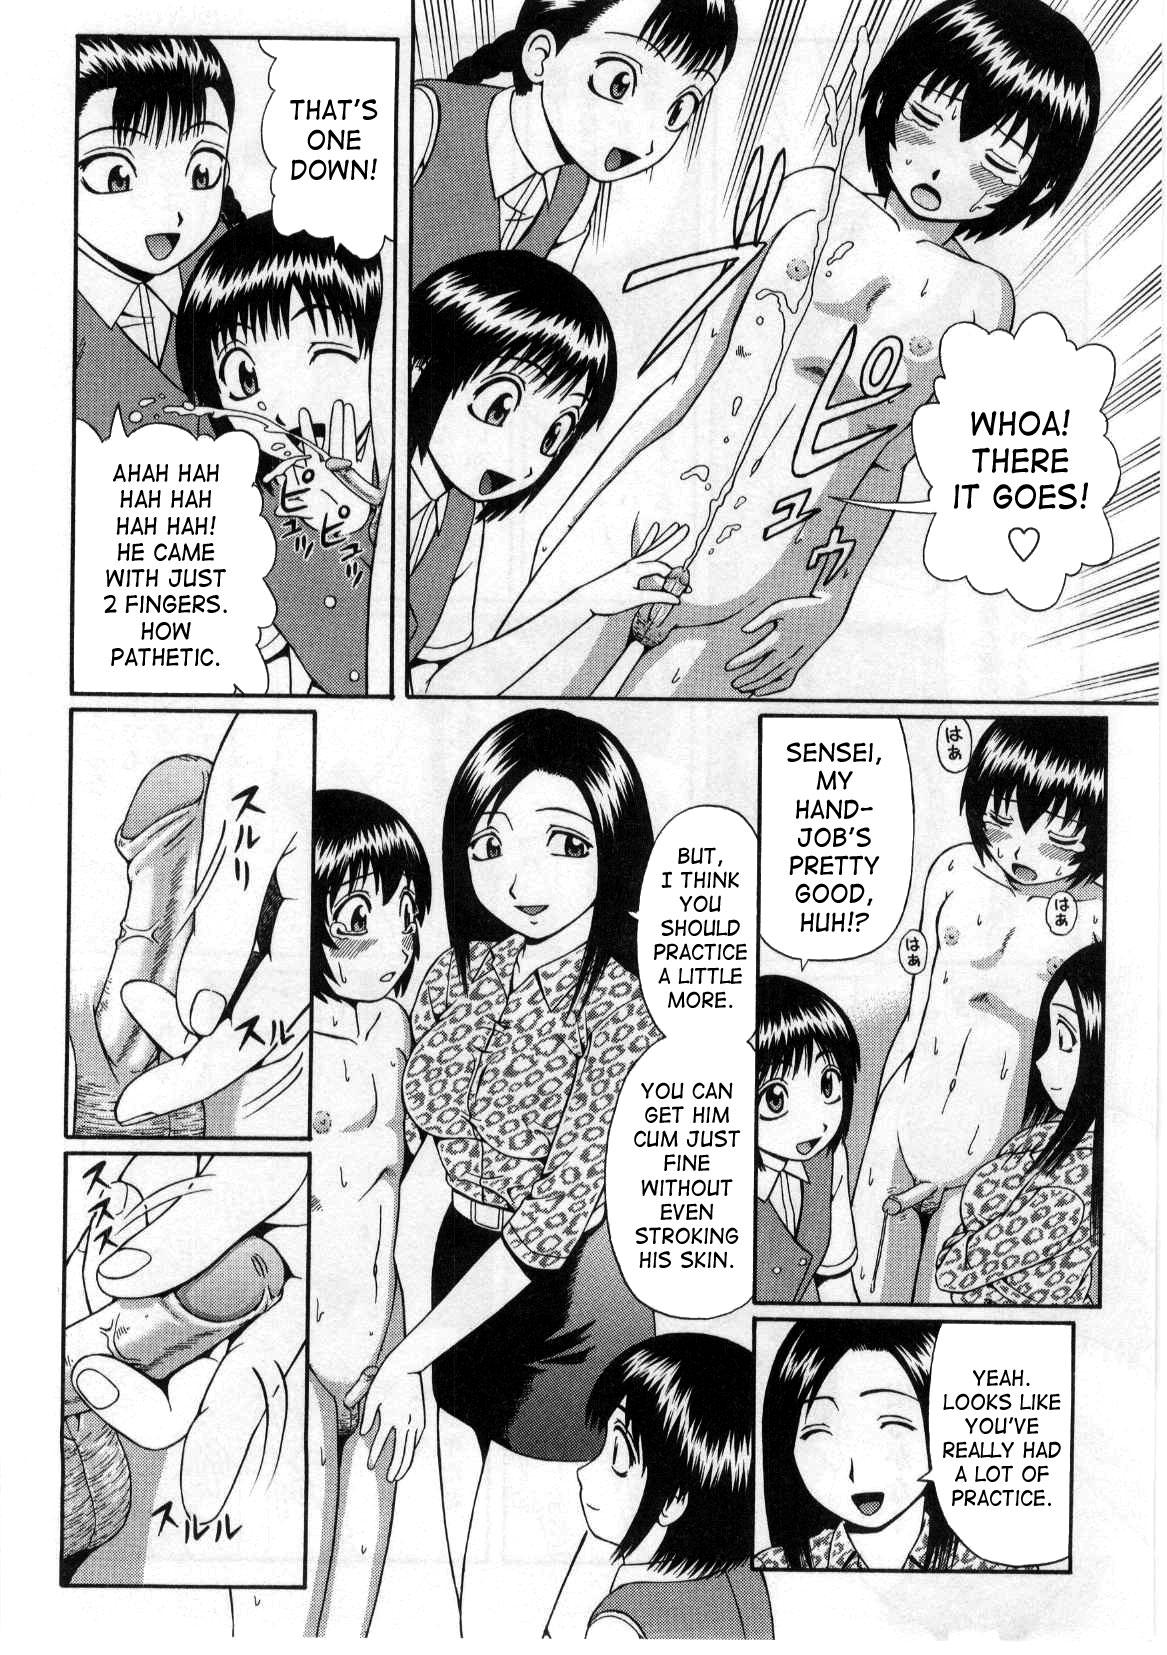 Oral Suisen no Jouken | Condition of Recommendation Sensual - Page 6